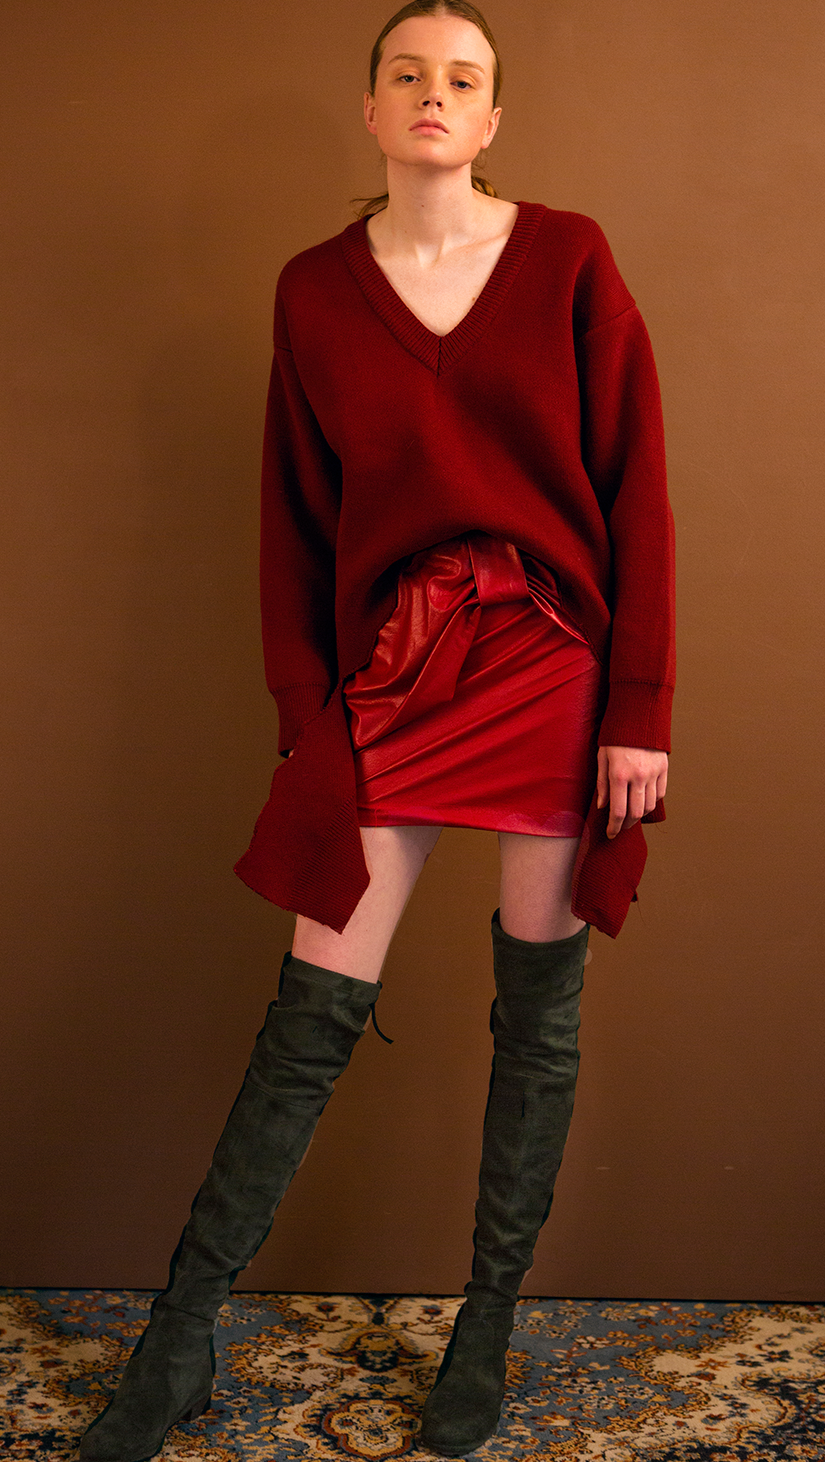 The Fallen Skirt in burgundy. With a bow detailing, concealed zip closure along side. Mini length. Lightweight.